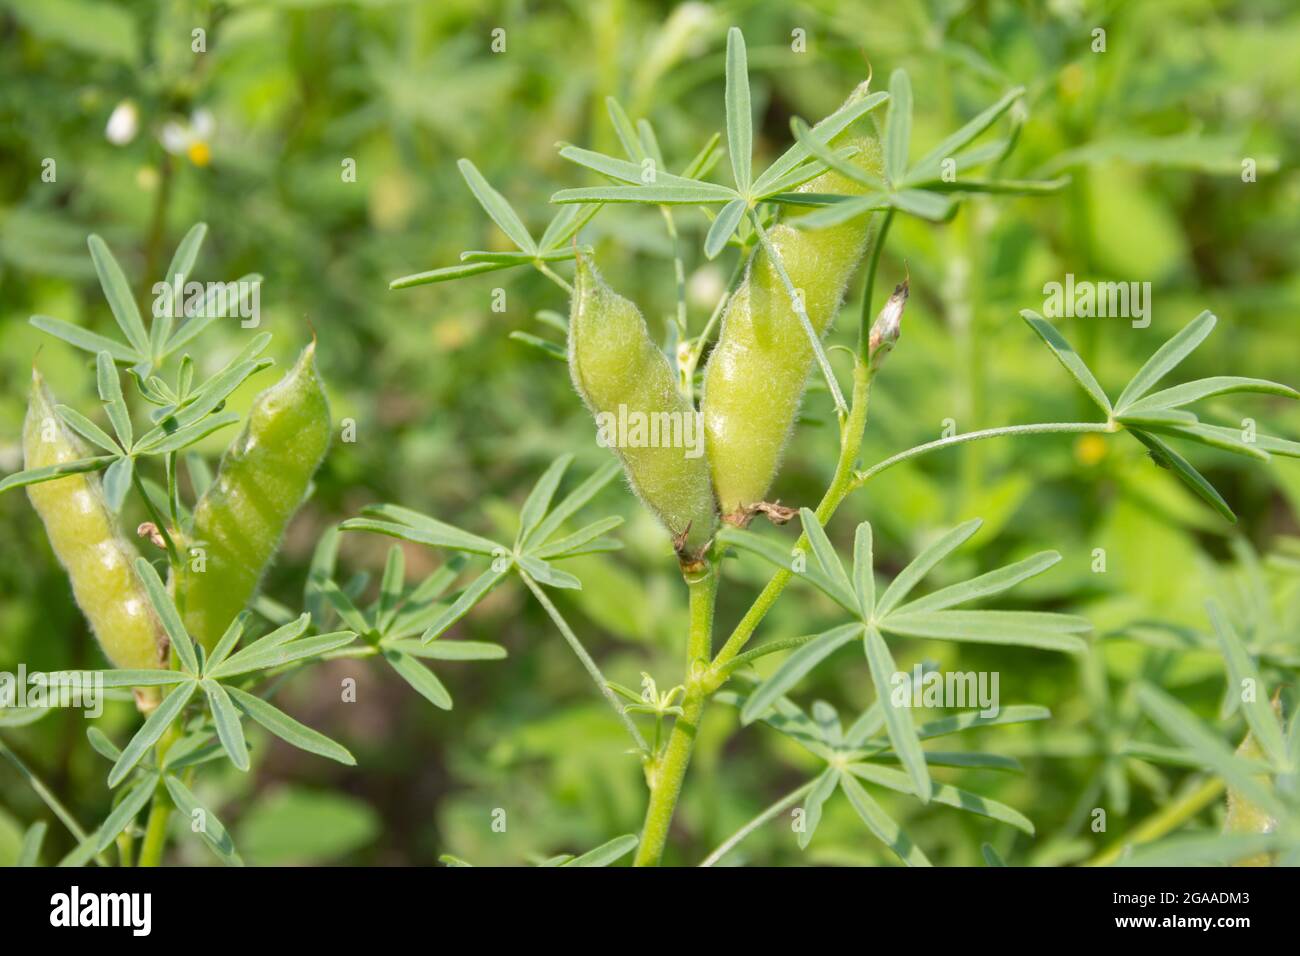 Agriculture of lupine, Lupinus angustifolius, with mature green pods. Close up. Stock Photo